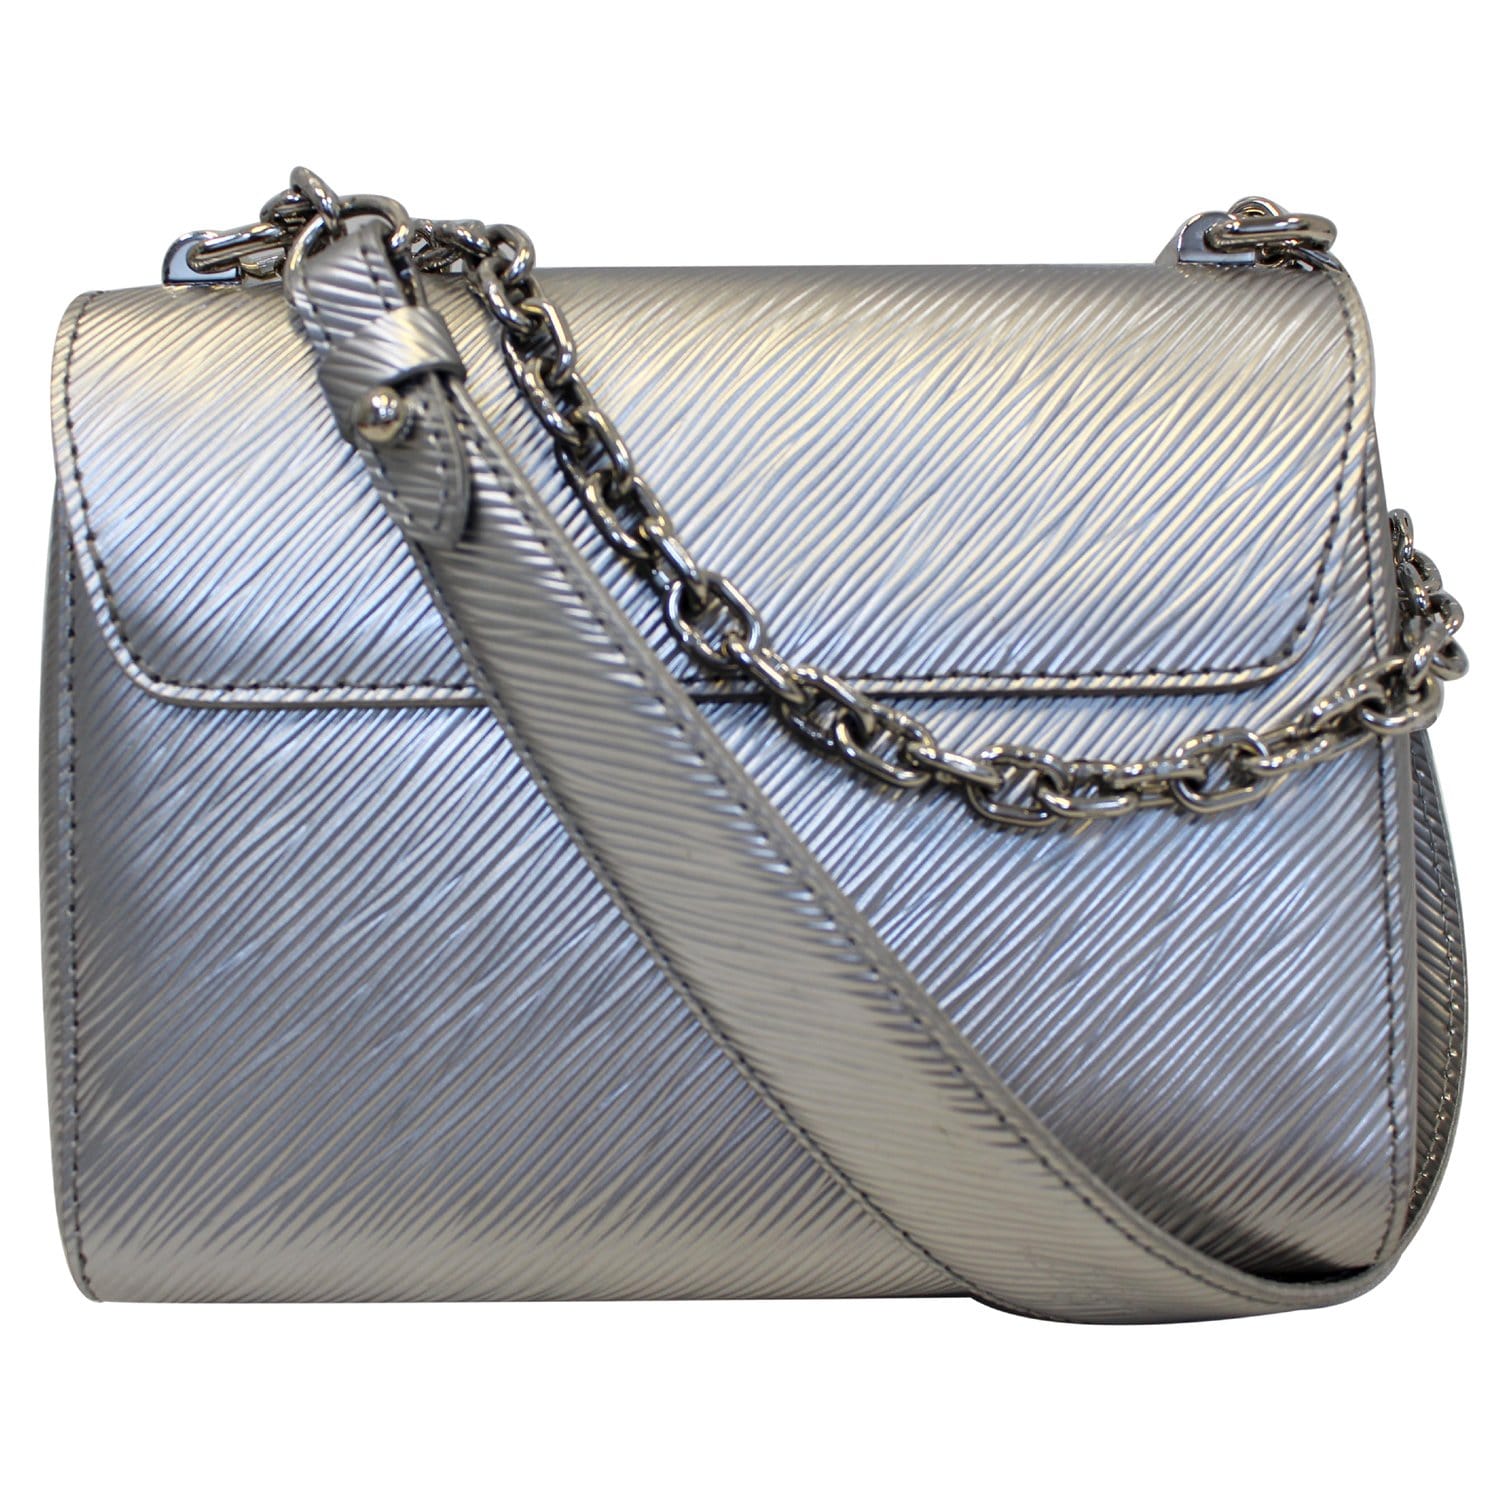 Pochette Evening - Epi leather with a metallic LV evoking Twist or